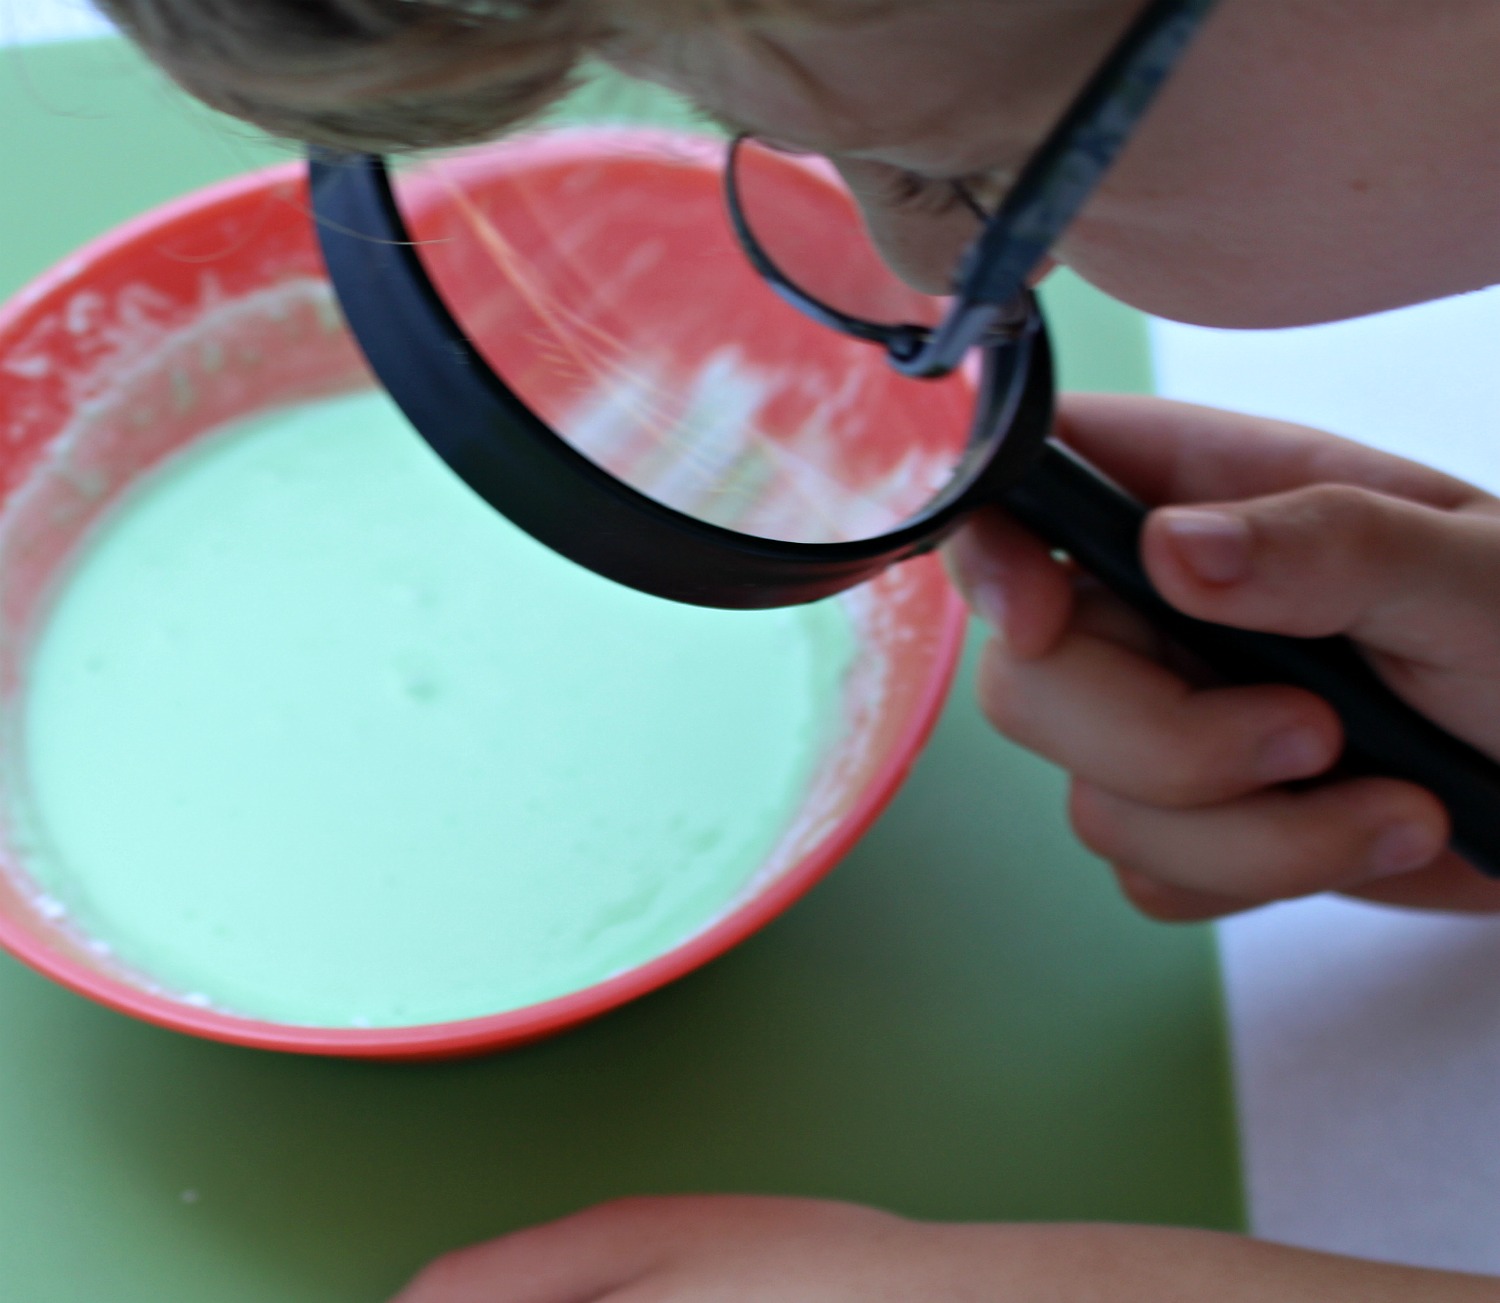 Exploring the Five Senses with Edible Jello Slime - Exploring how the slime looks.